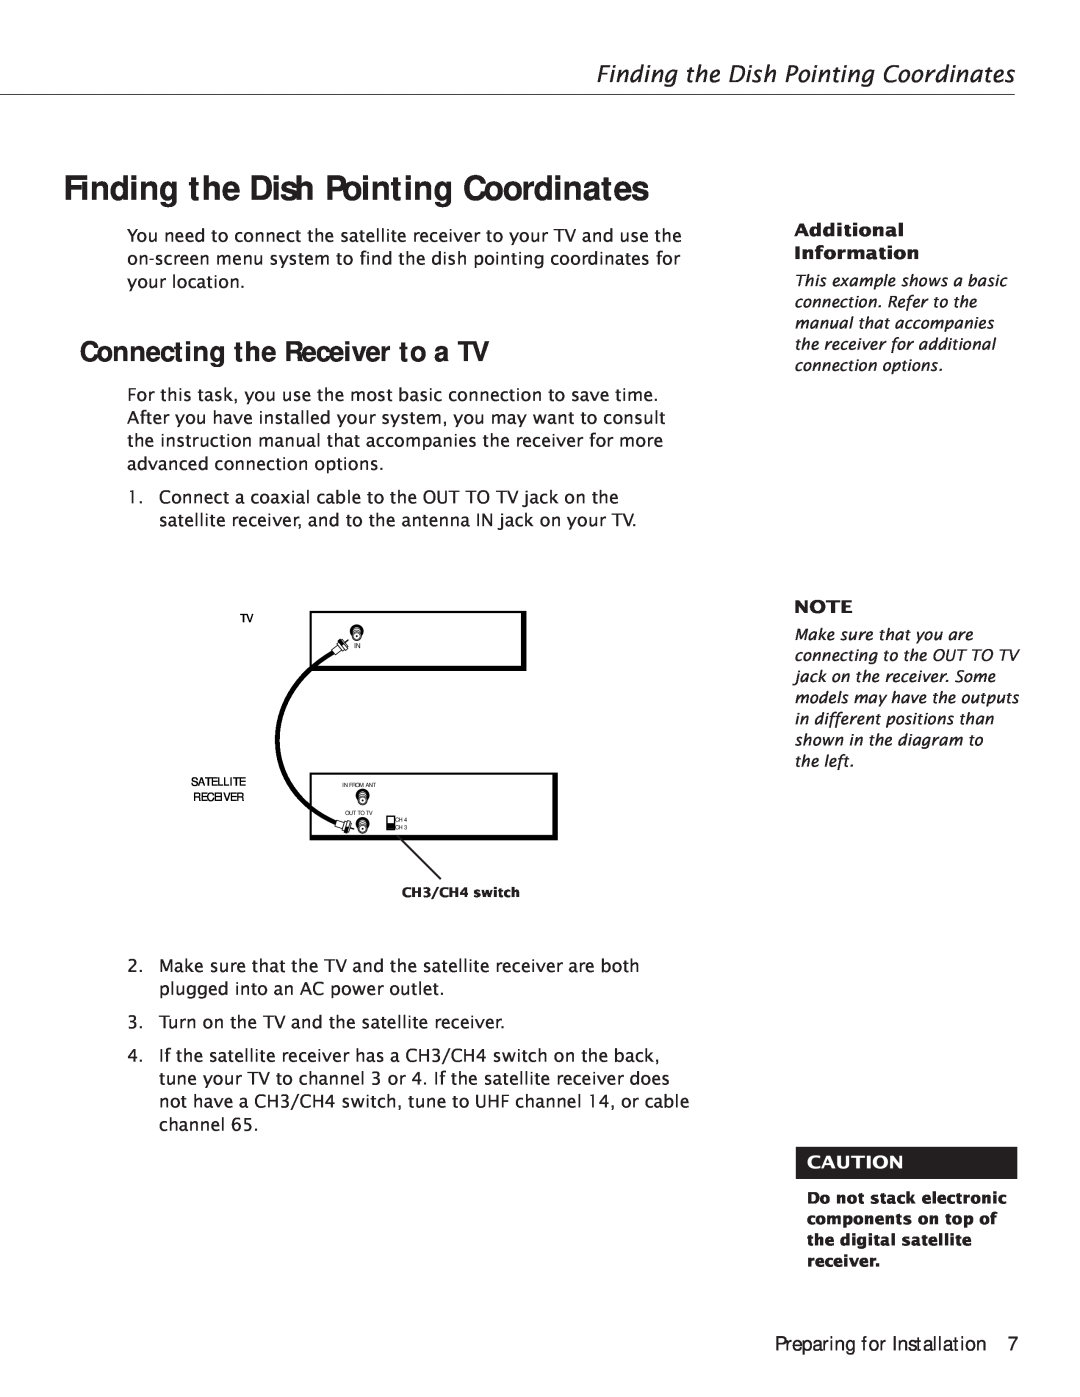 RCA Satellite TV Antenna manual Finding the Dish Pointing Coordinates, Connecting the Receiver to a TV 